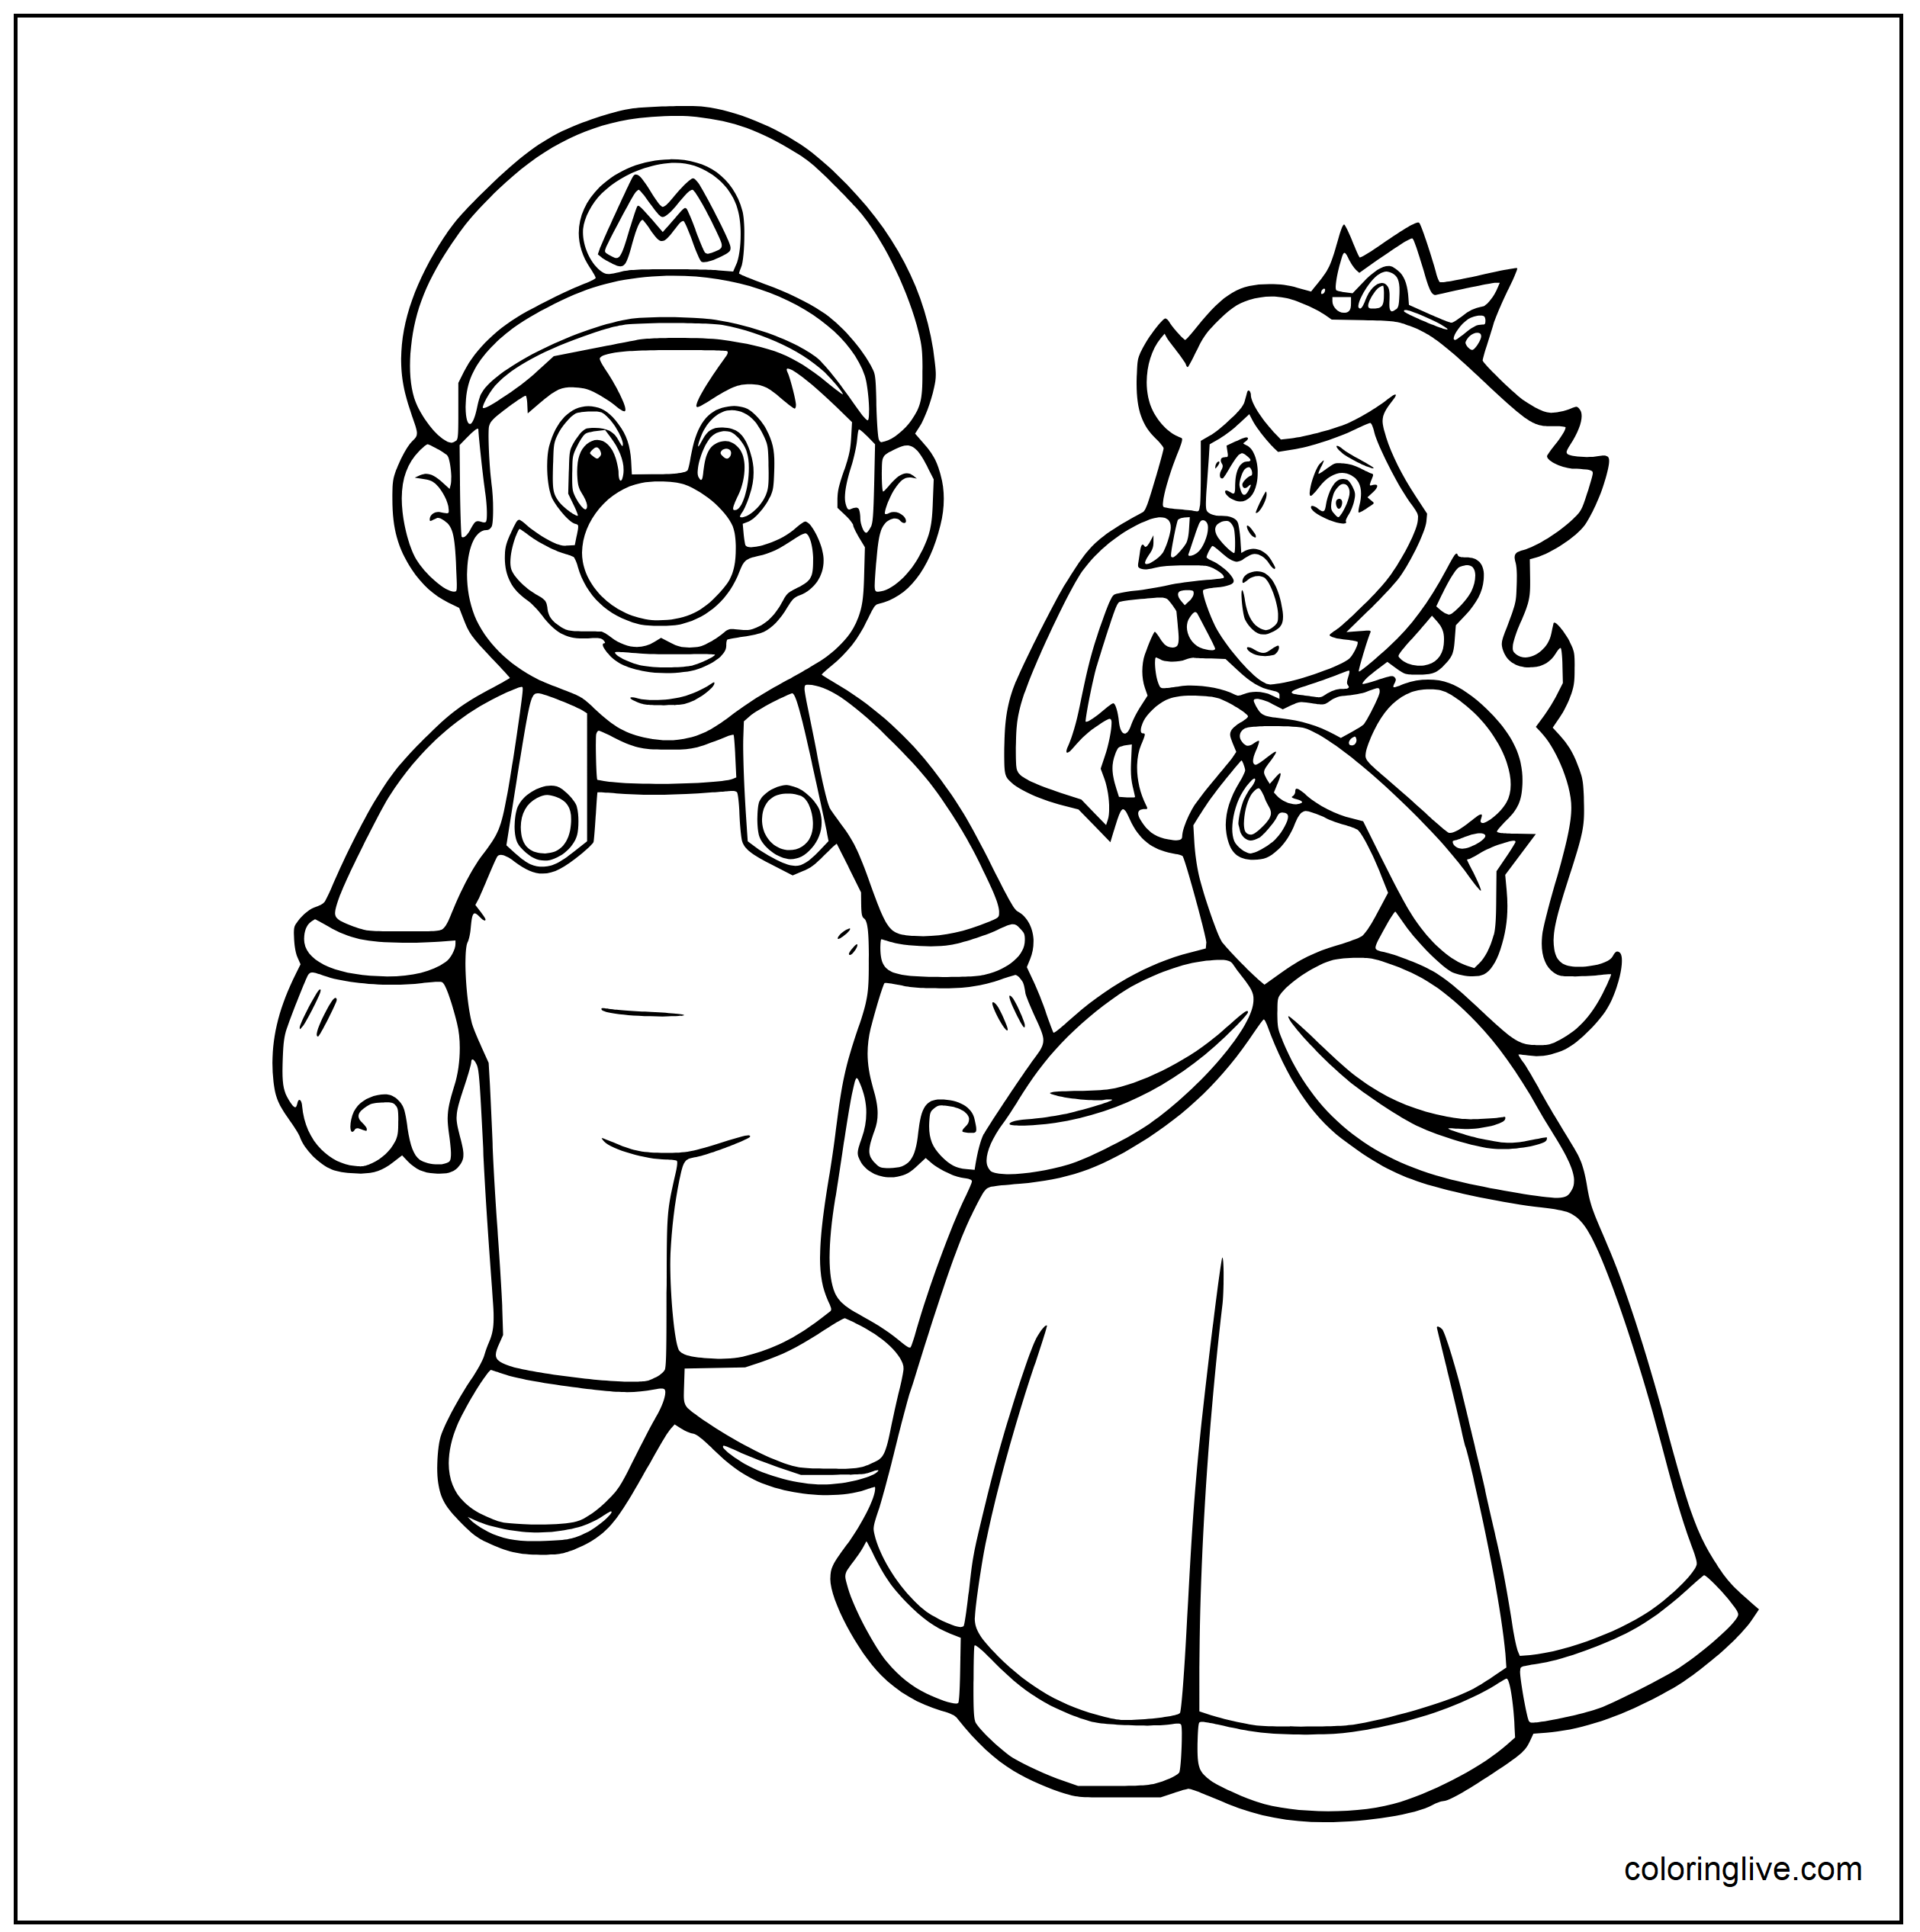 Printable Mario and Peach Coloring Page for kids.